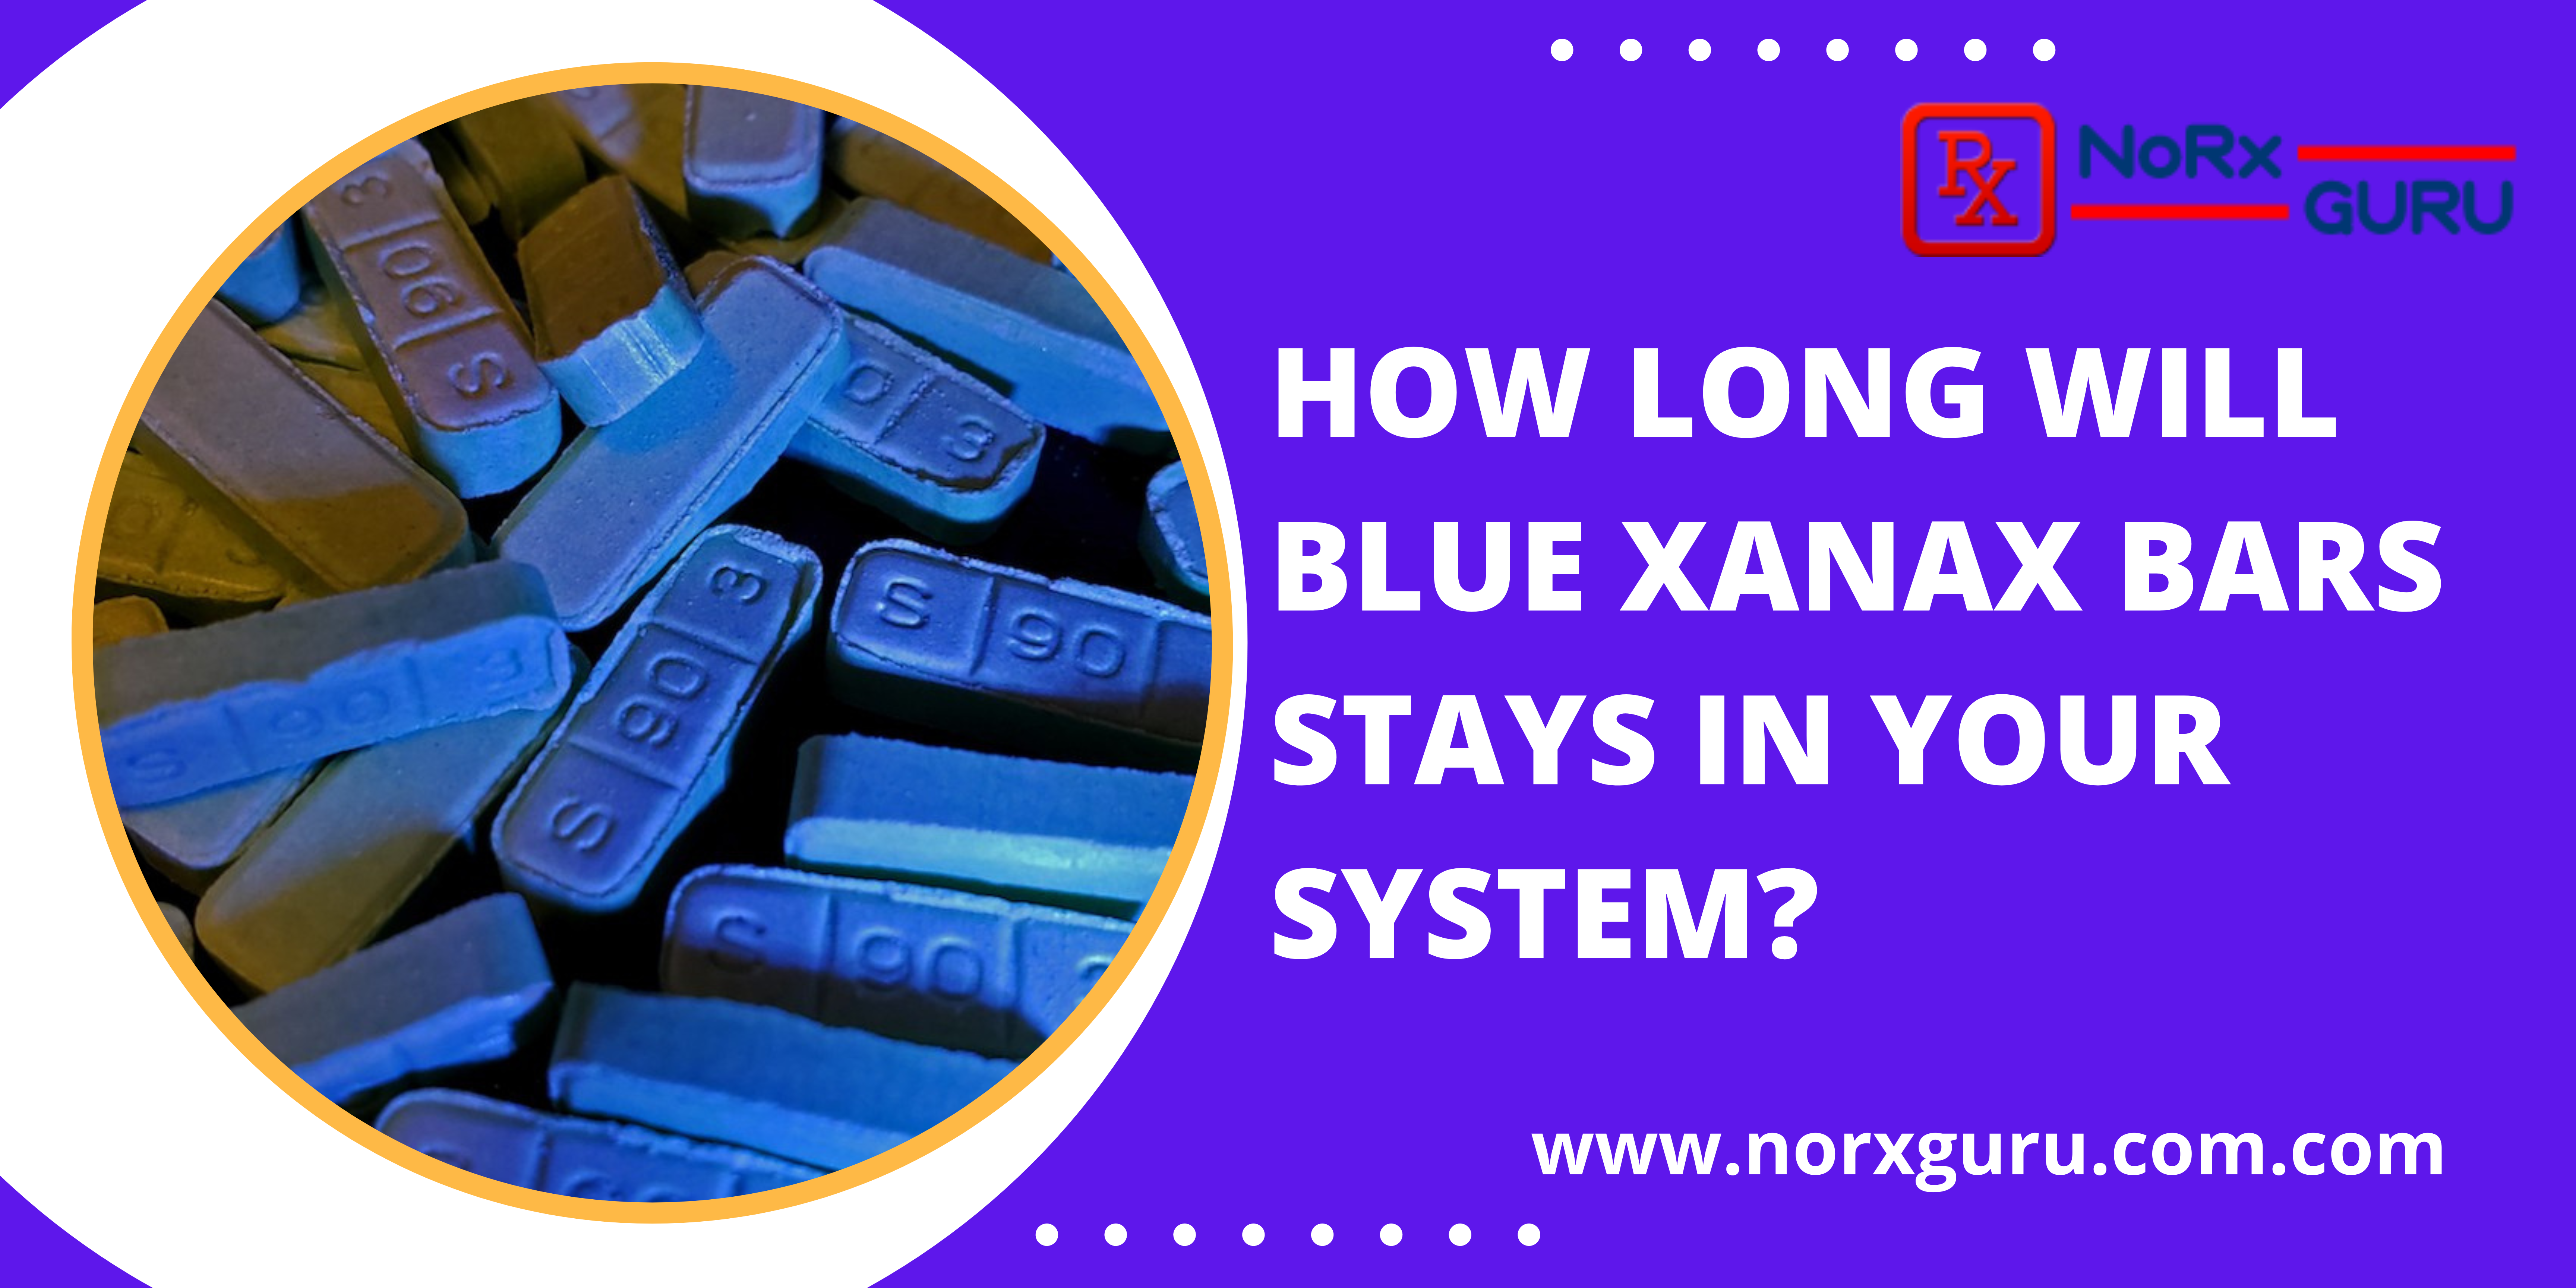 How Long Will Blue Xanax Bars Stays In Your System